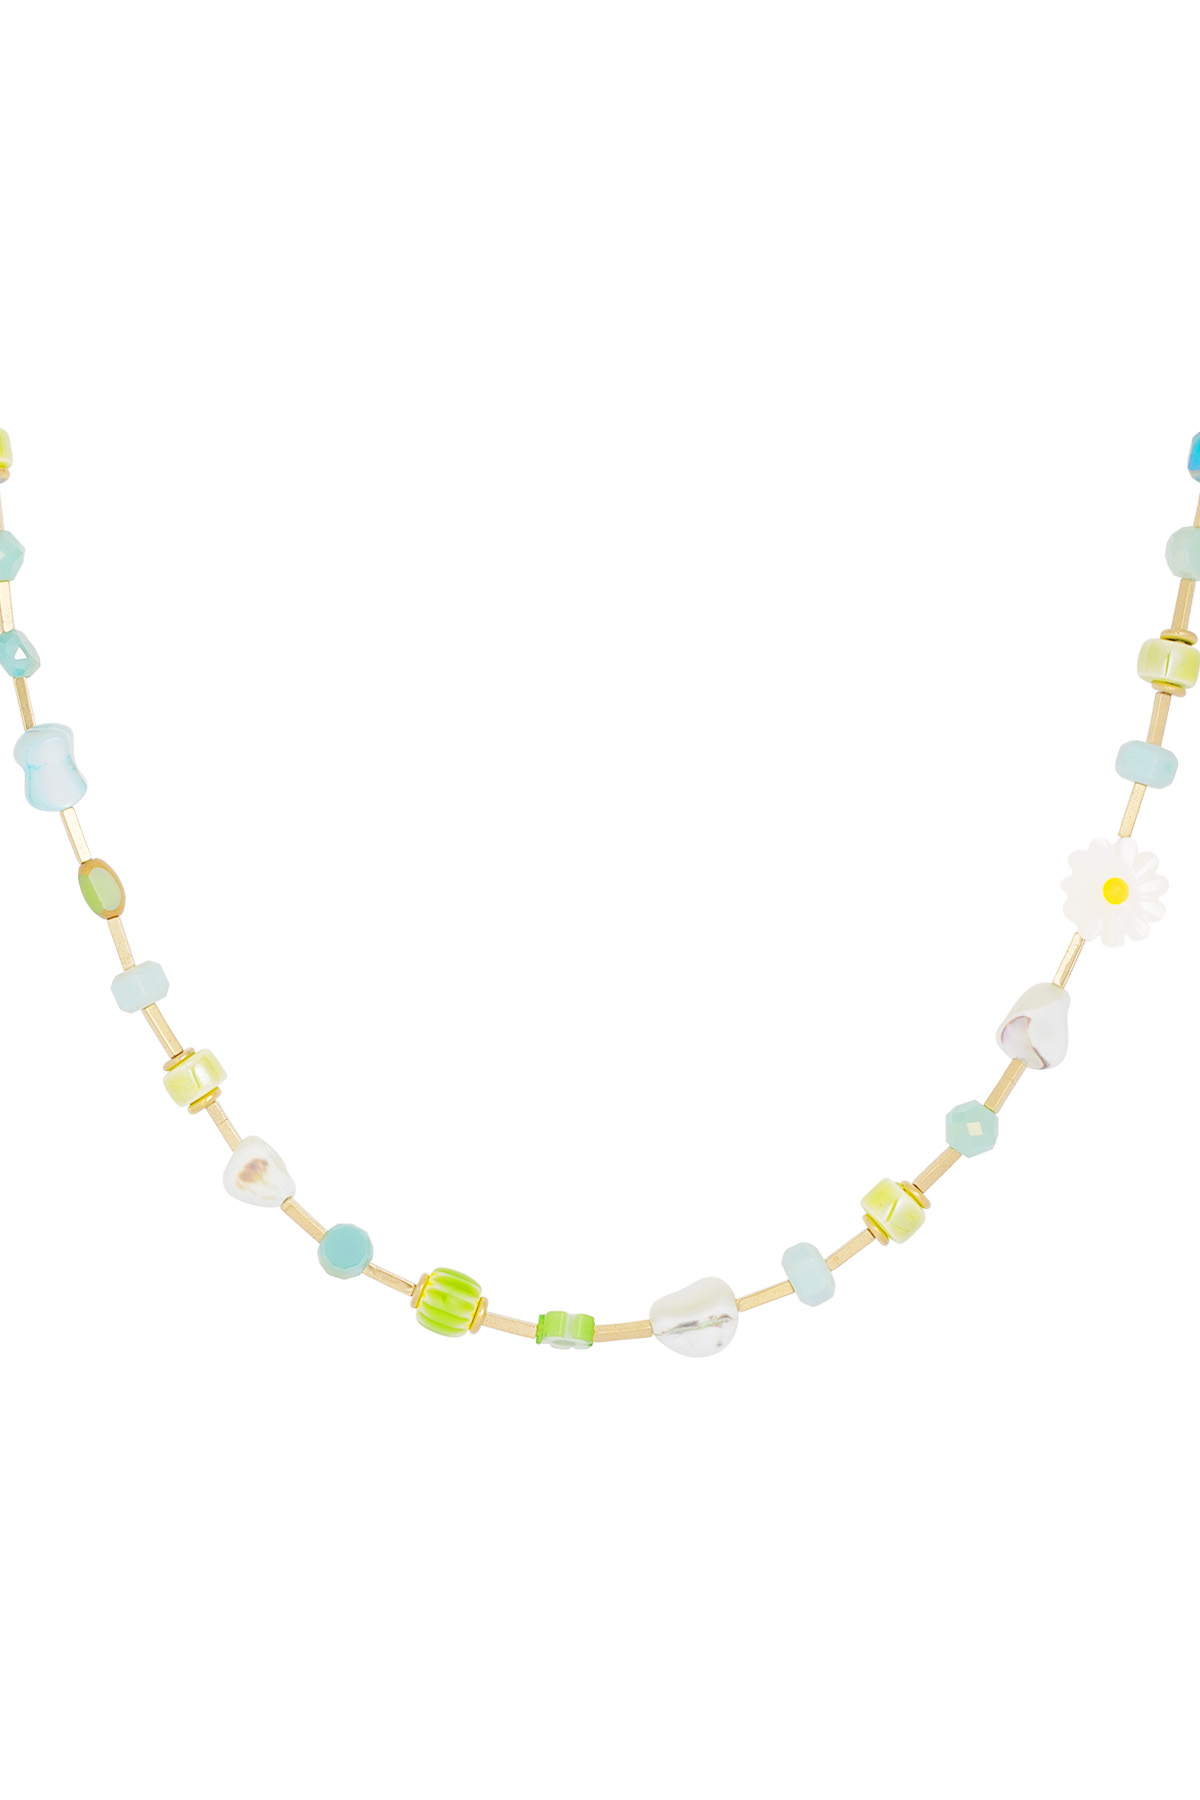 Colorful necklace green oasis - green gold